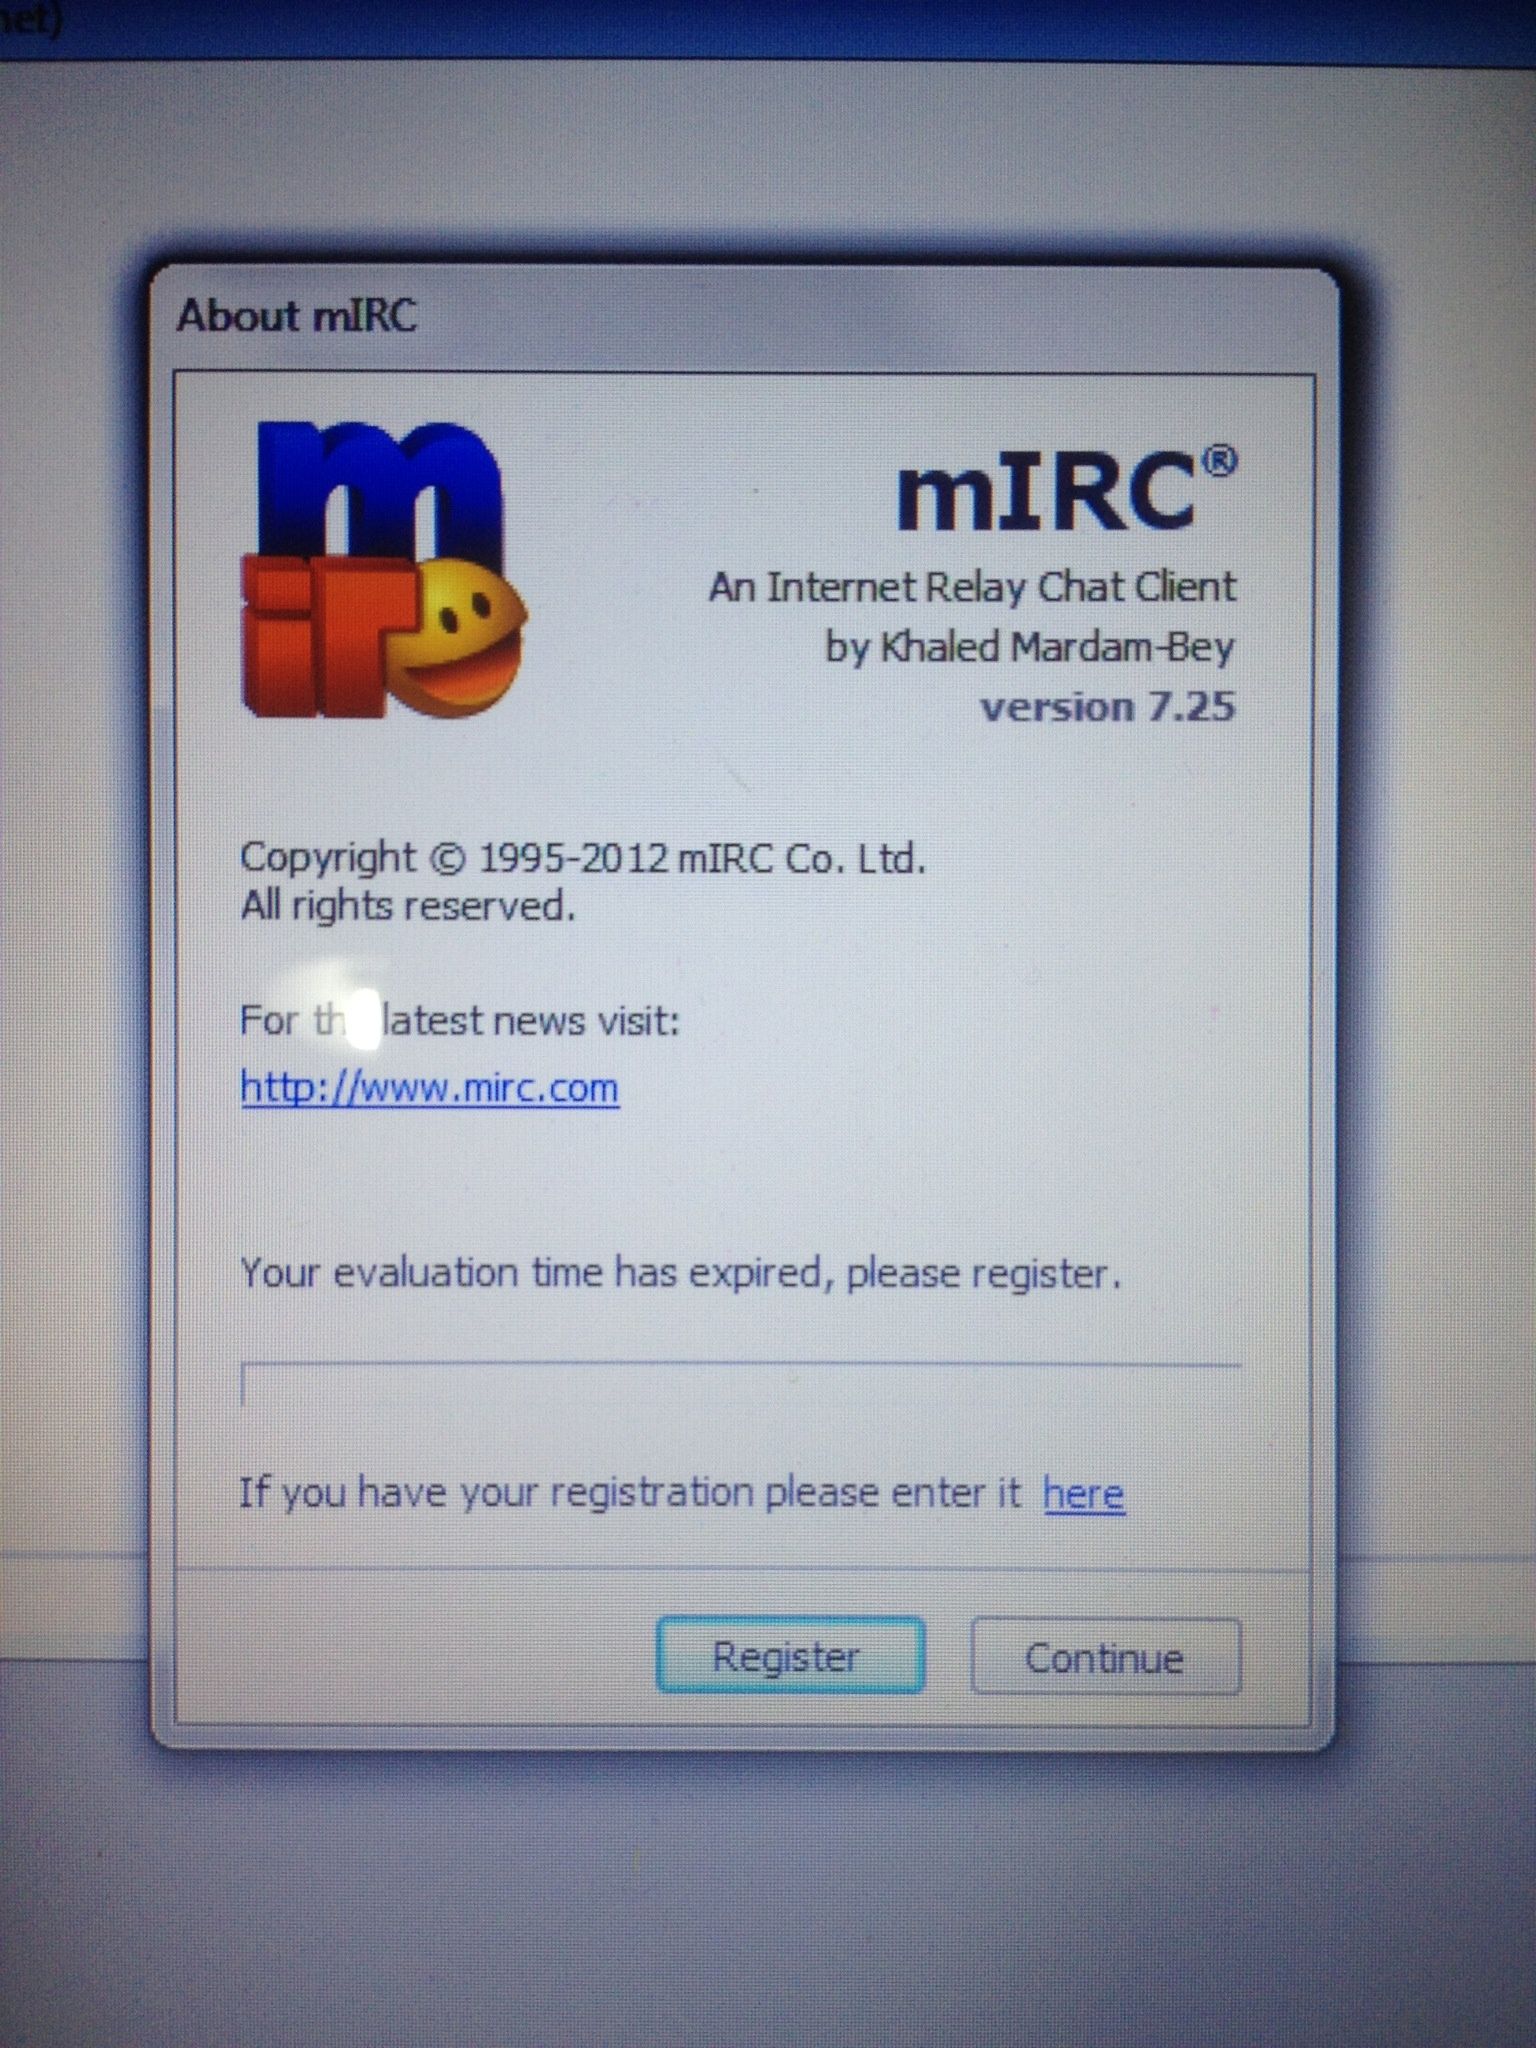 mirc exit instead of continue